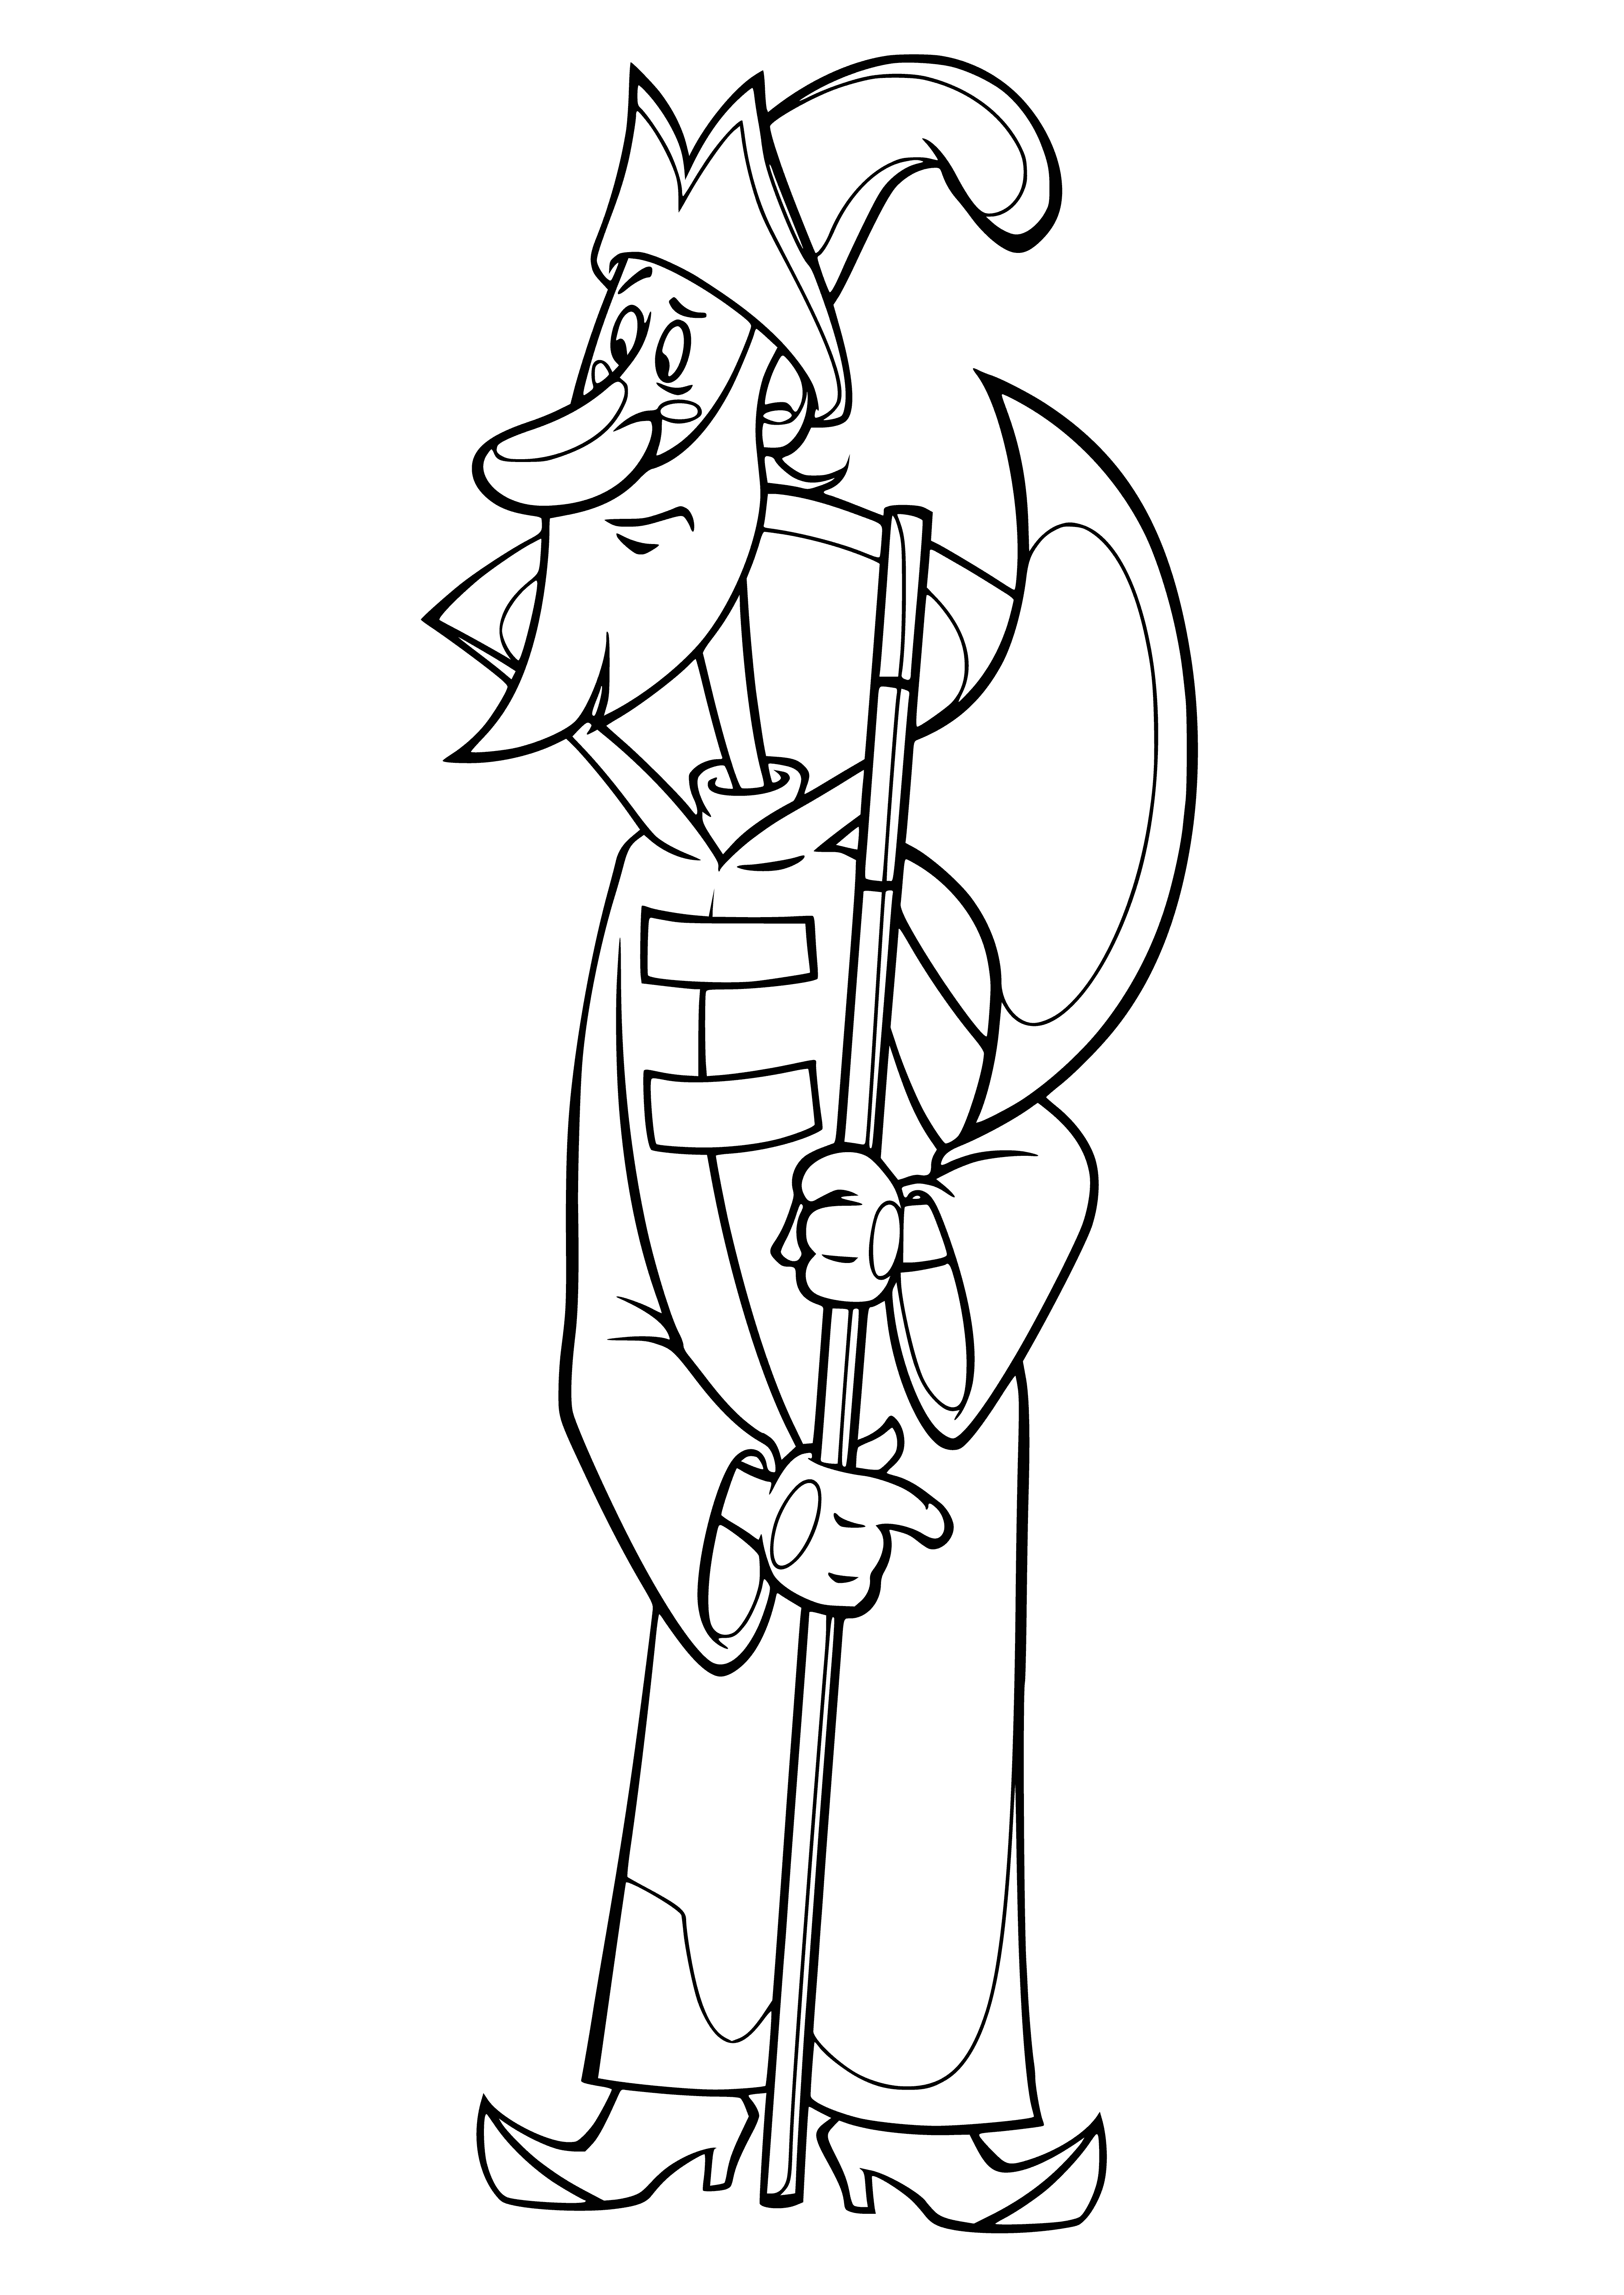 coloring page: Vovka guards kingdom entrance; large, furry creat. Has pointed nose and ears, bright blue eyes. Red collar with gold badge in center.